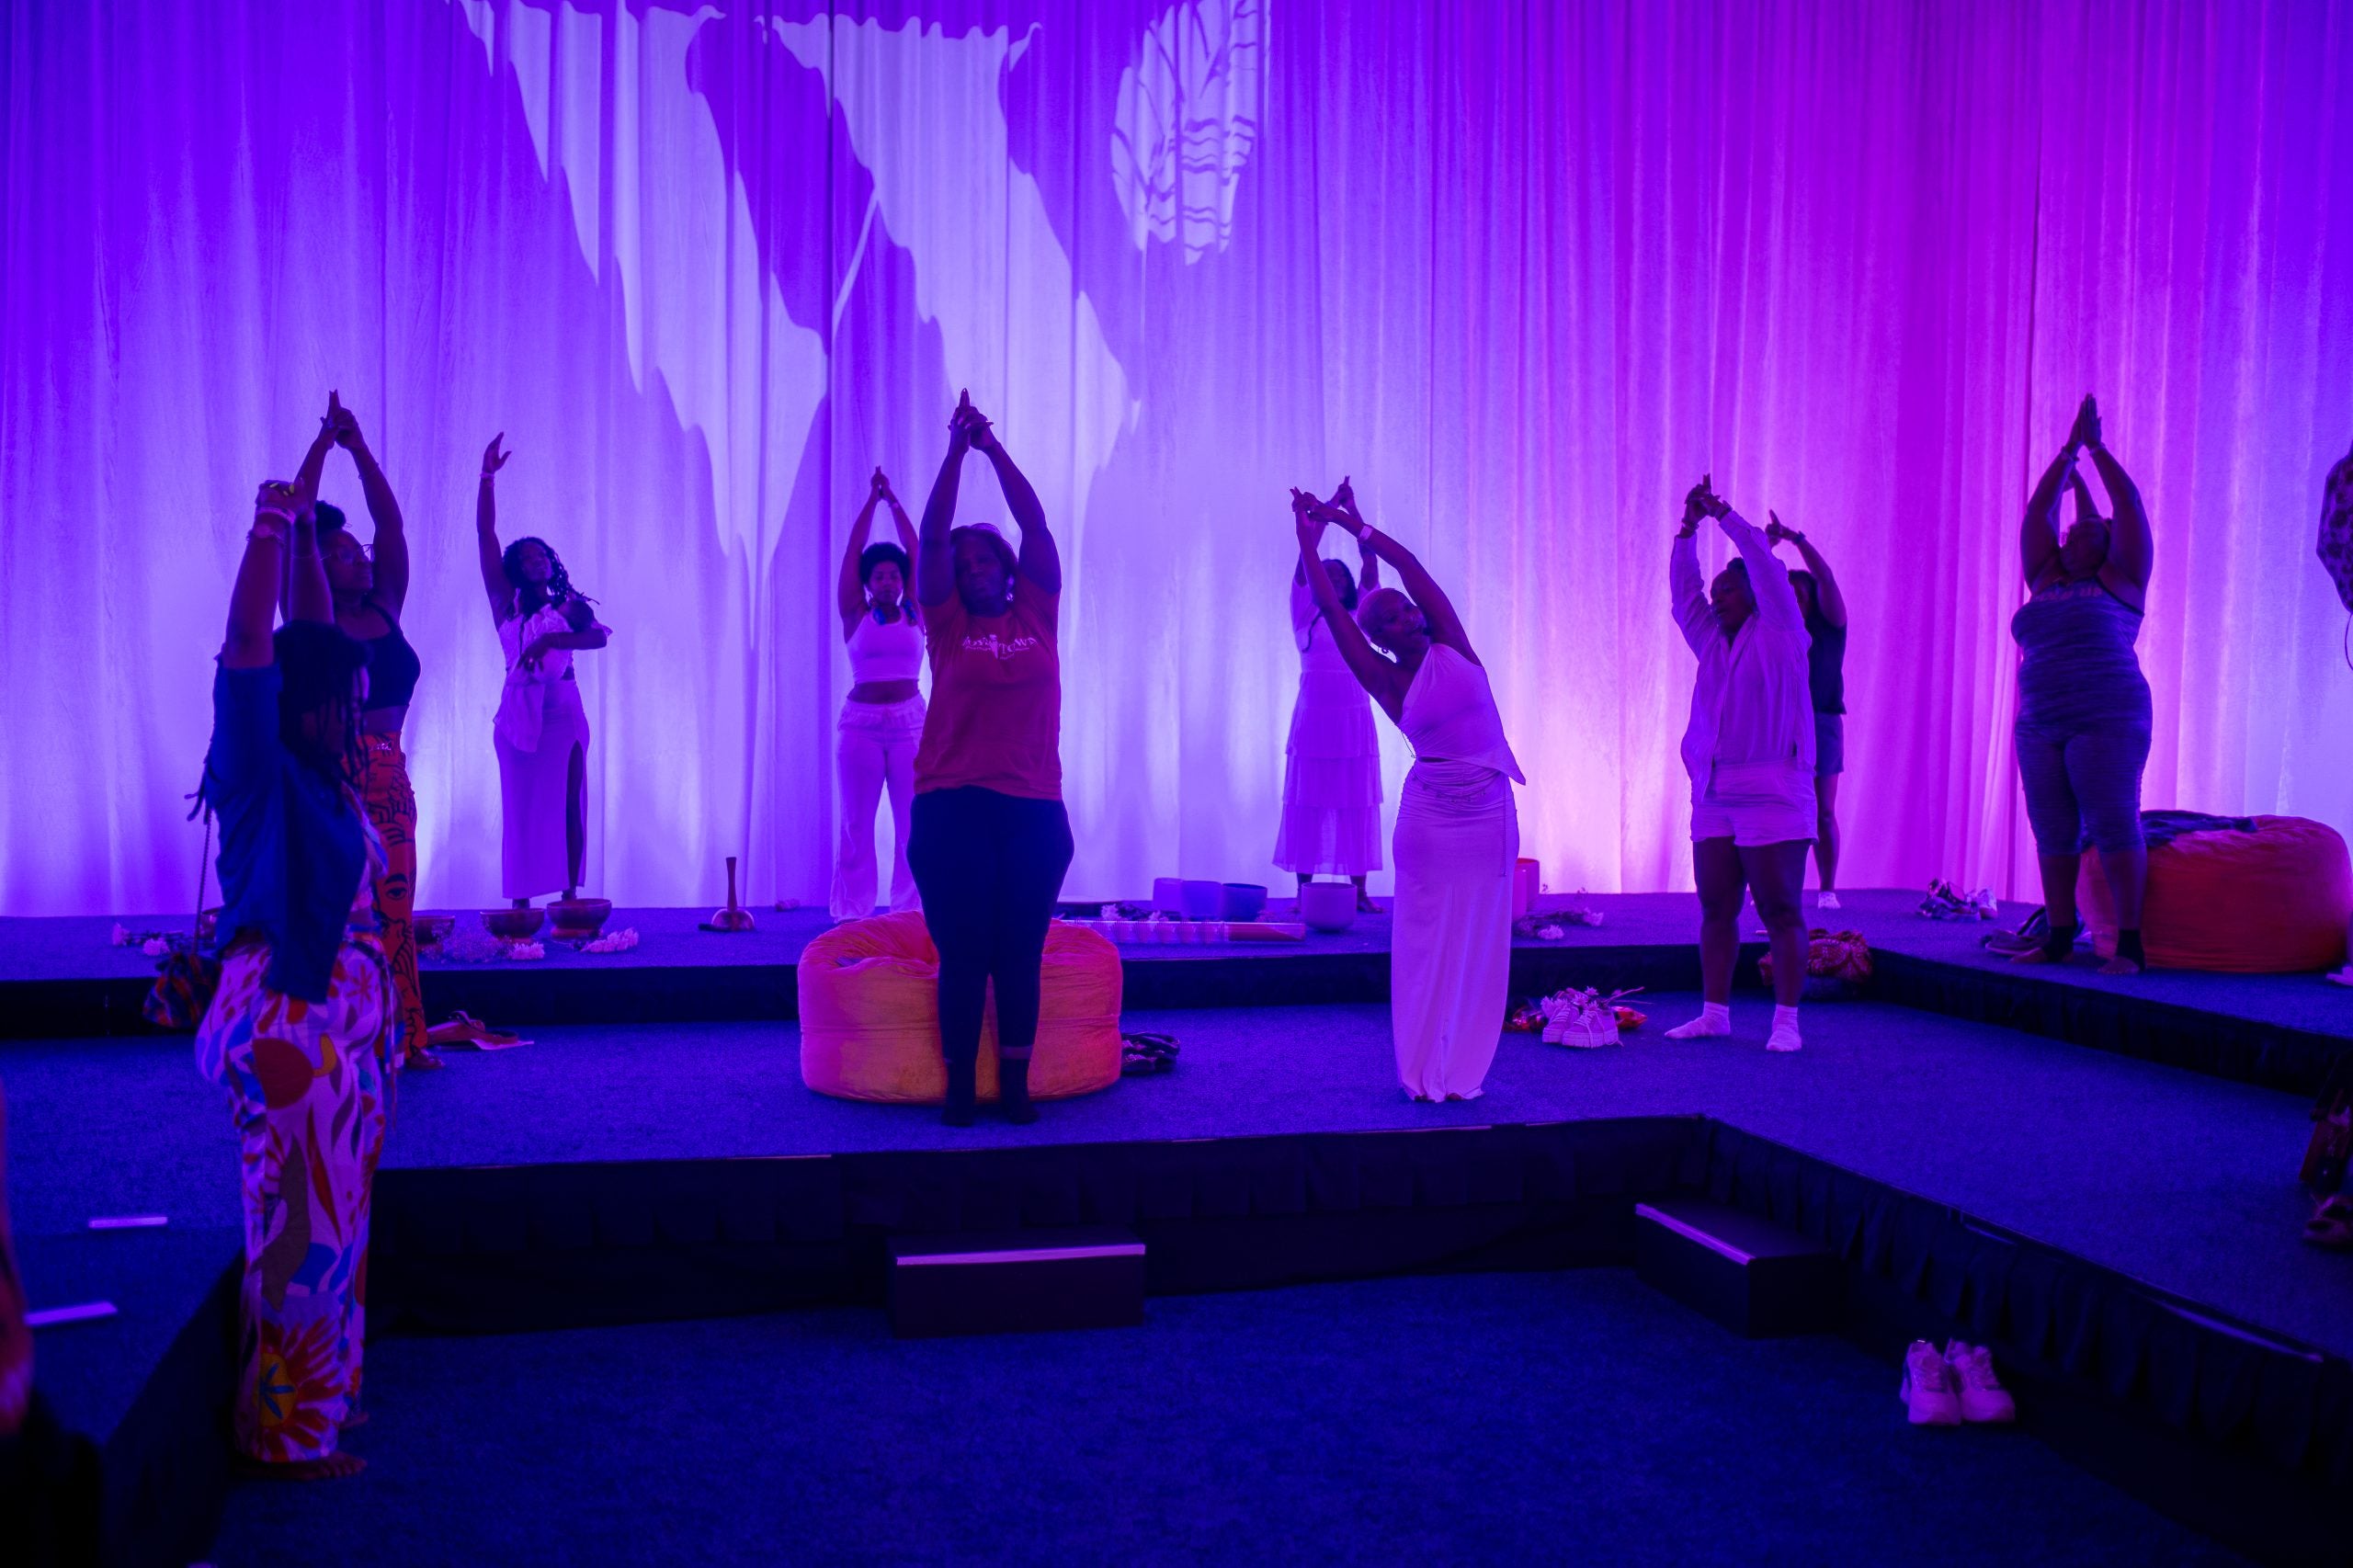 The Guided Meditation Space At The ESSENCE Festival Of Culture Was The Perfect Place To Help Guests Heal